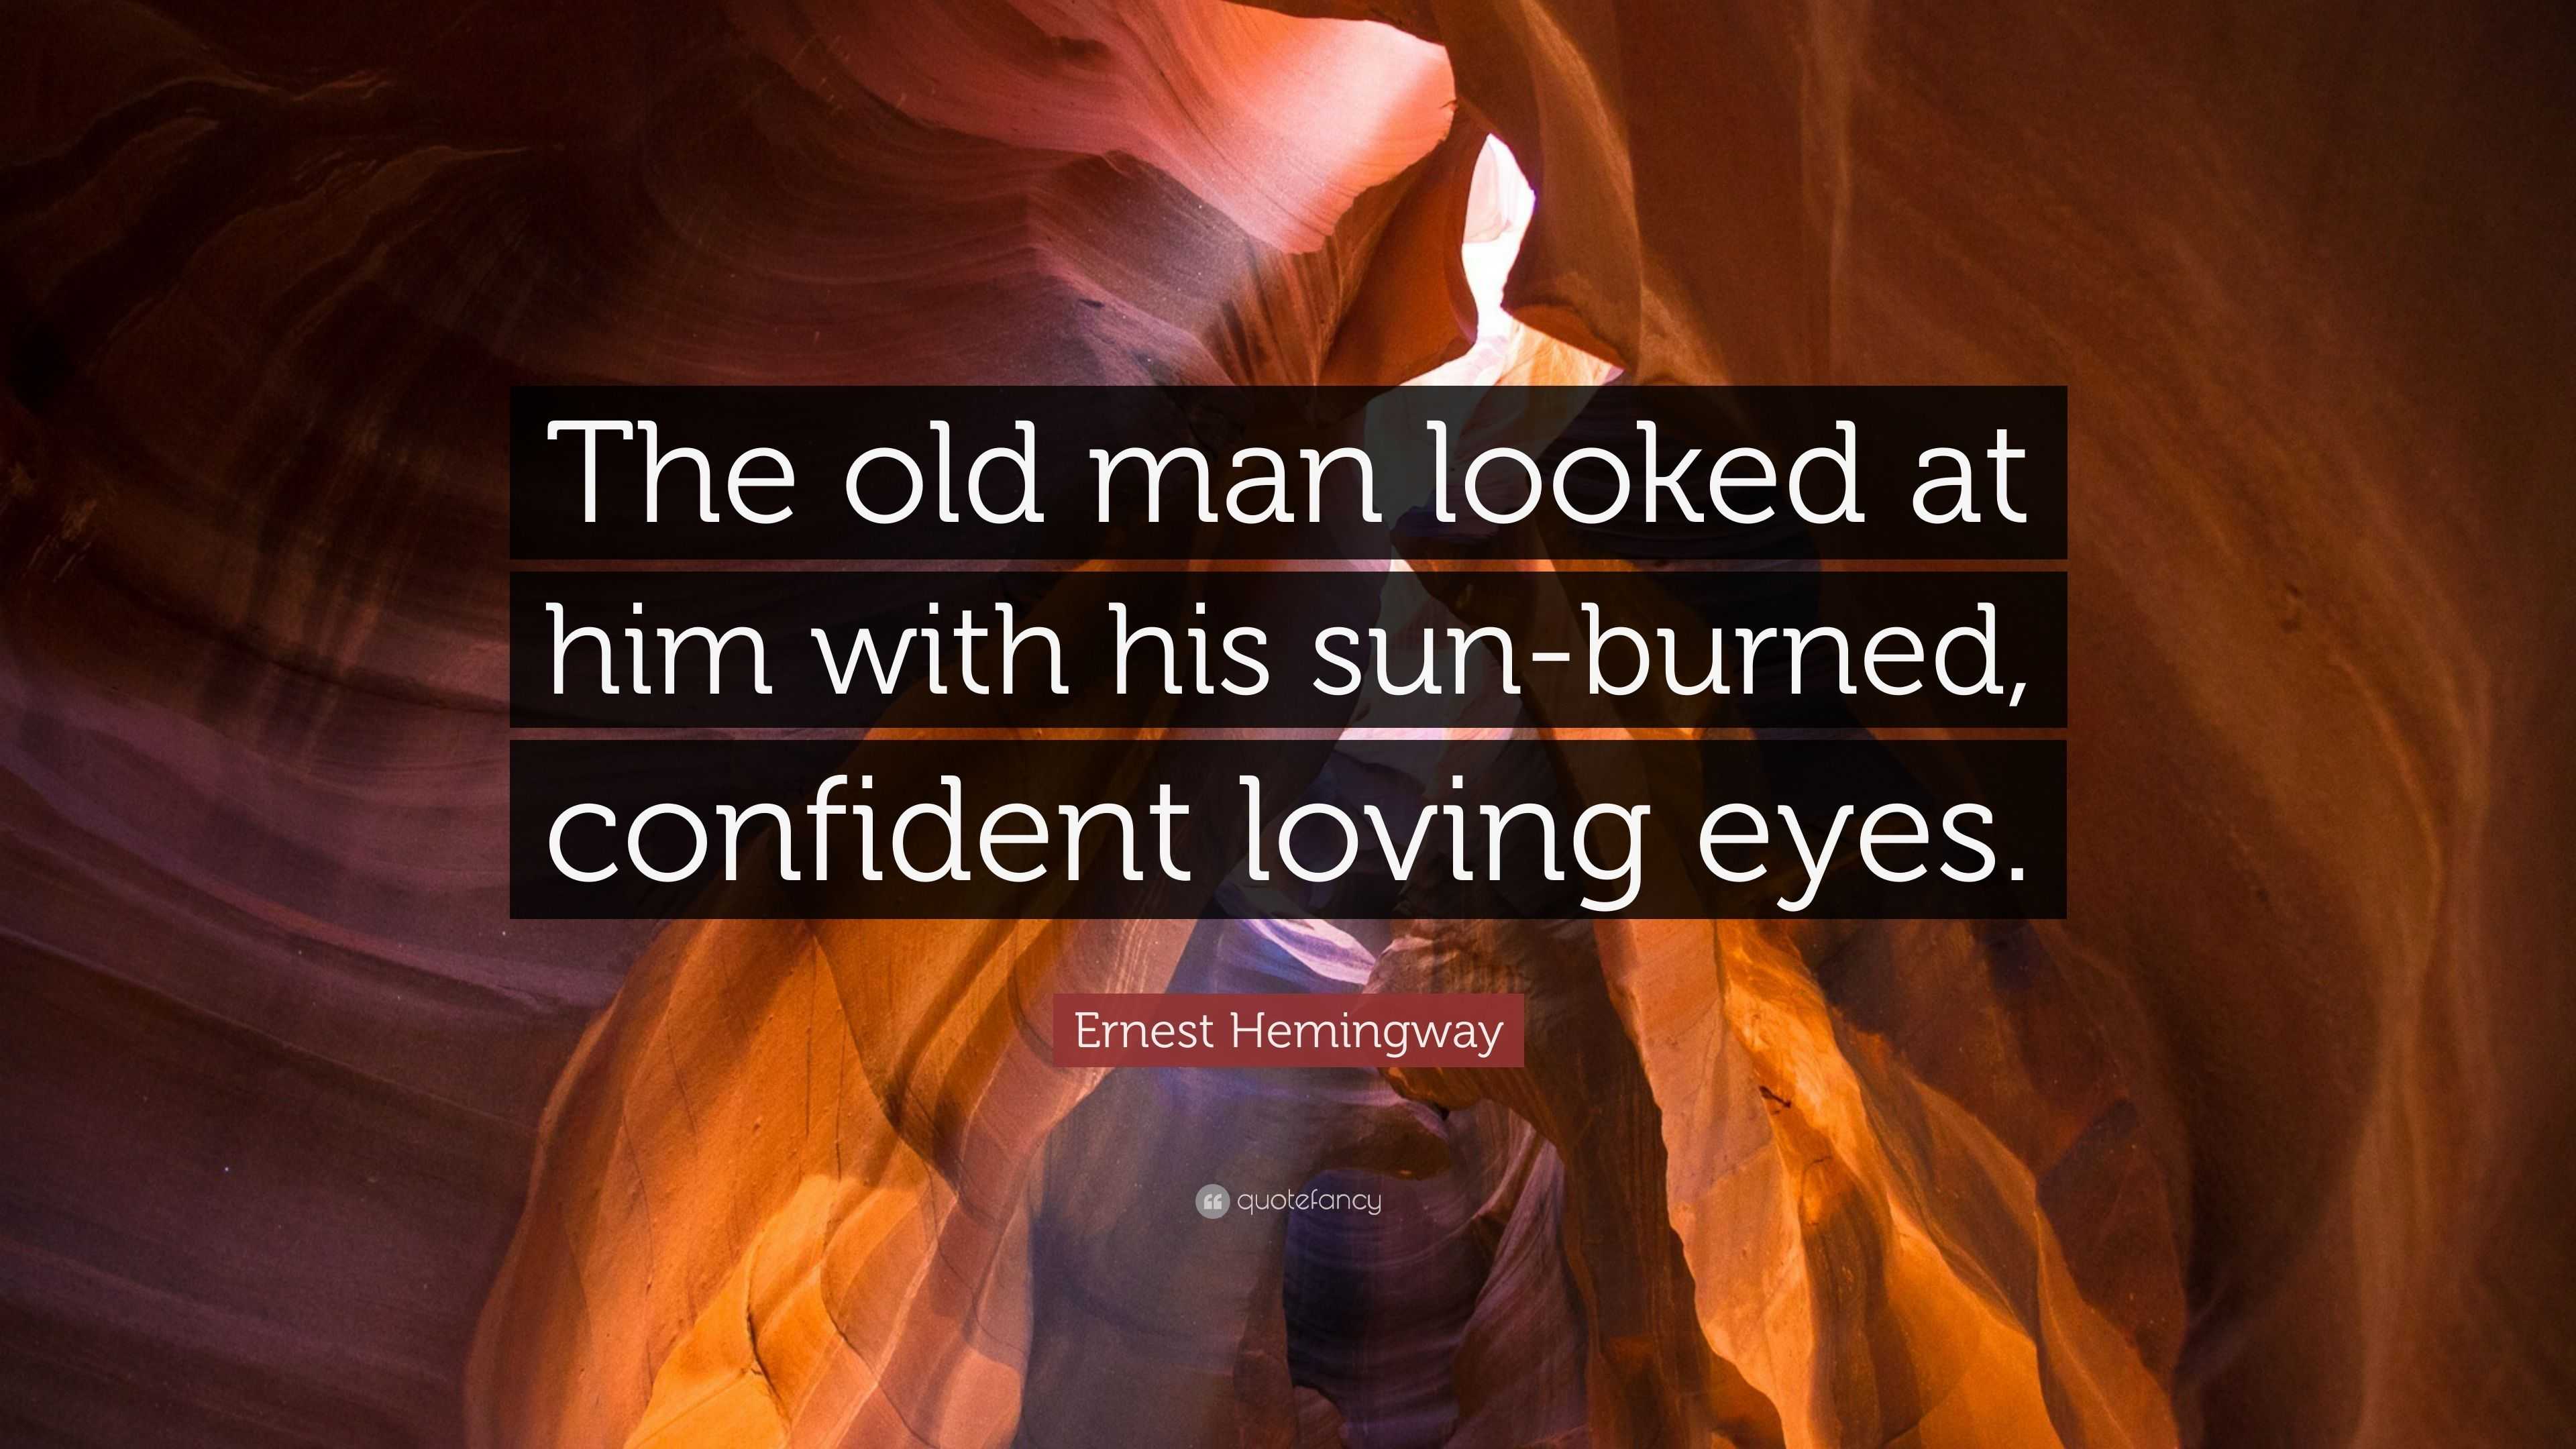 Ernest Hemingway Quote “The old man looked at him with his sun burned